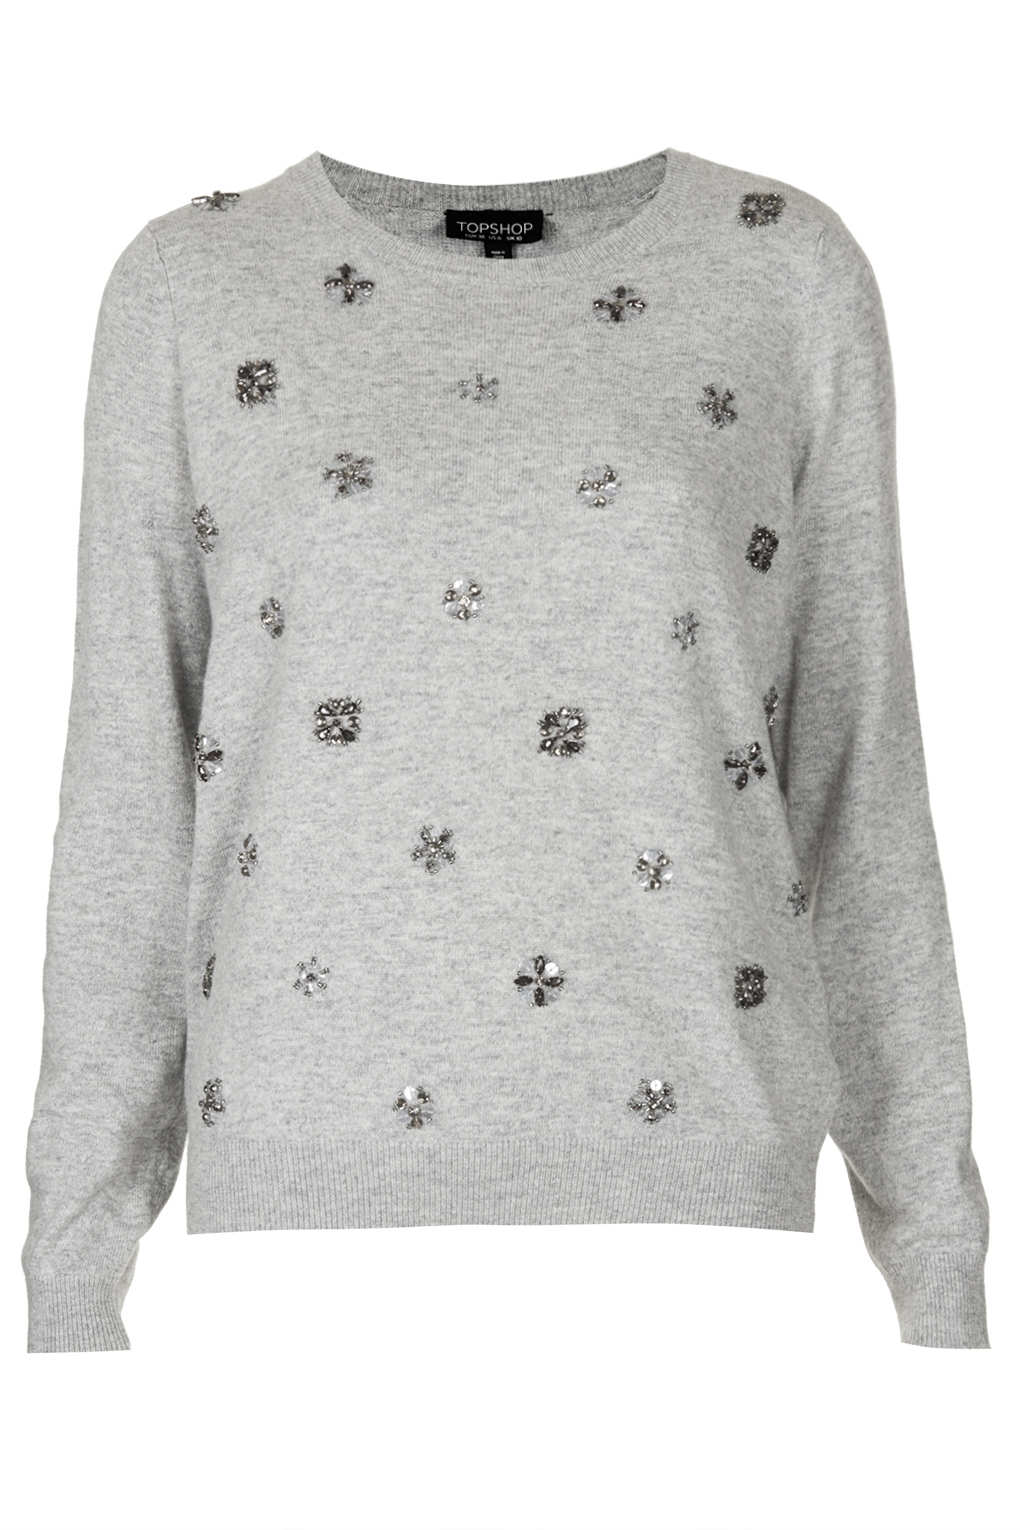 Lyst - Topshop Knitted Embellished Jumper in Gray